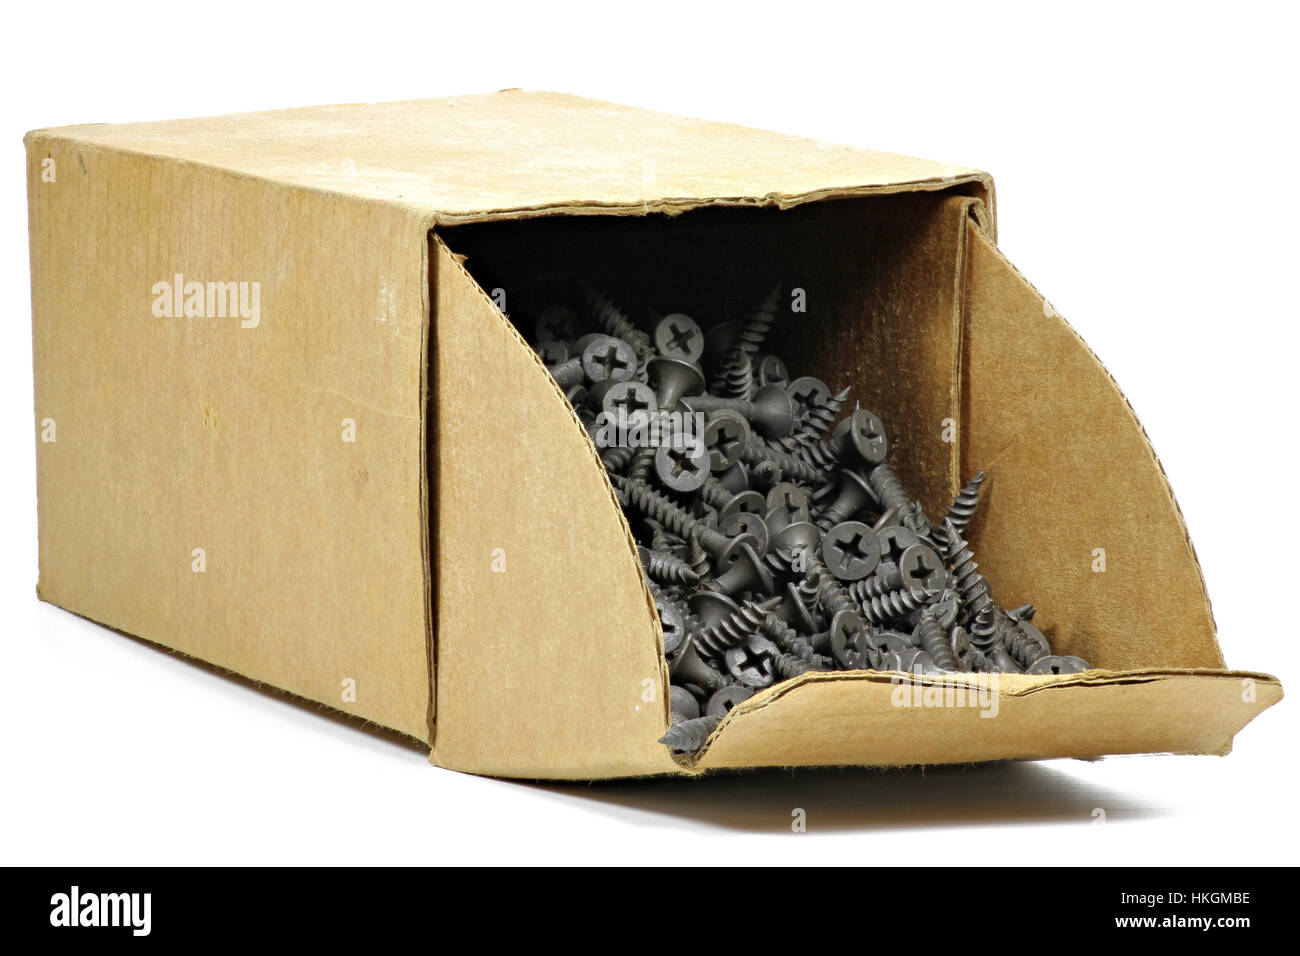 phosphated drywall screws in a cardboard container isolated on white background Stock Photo